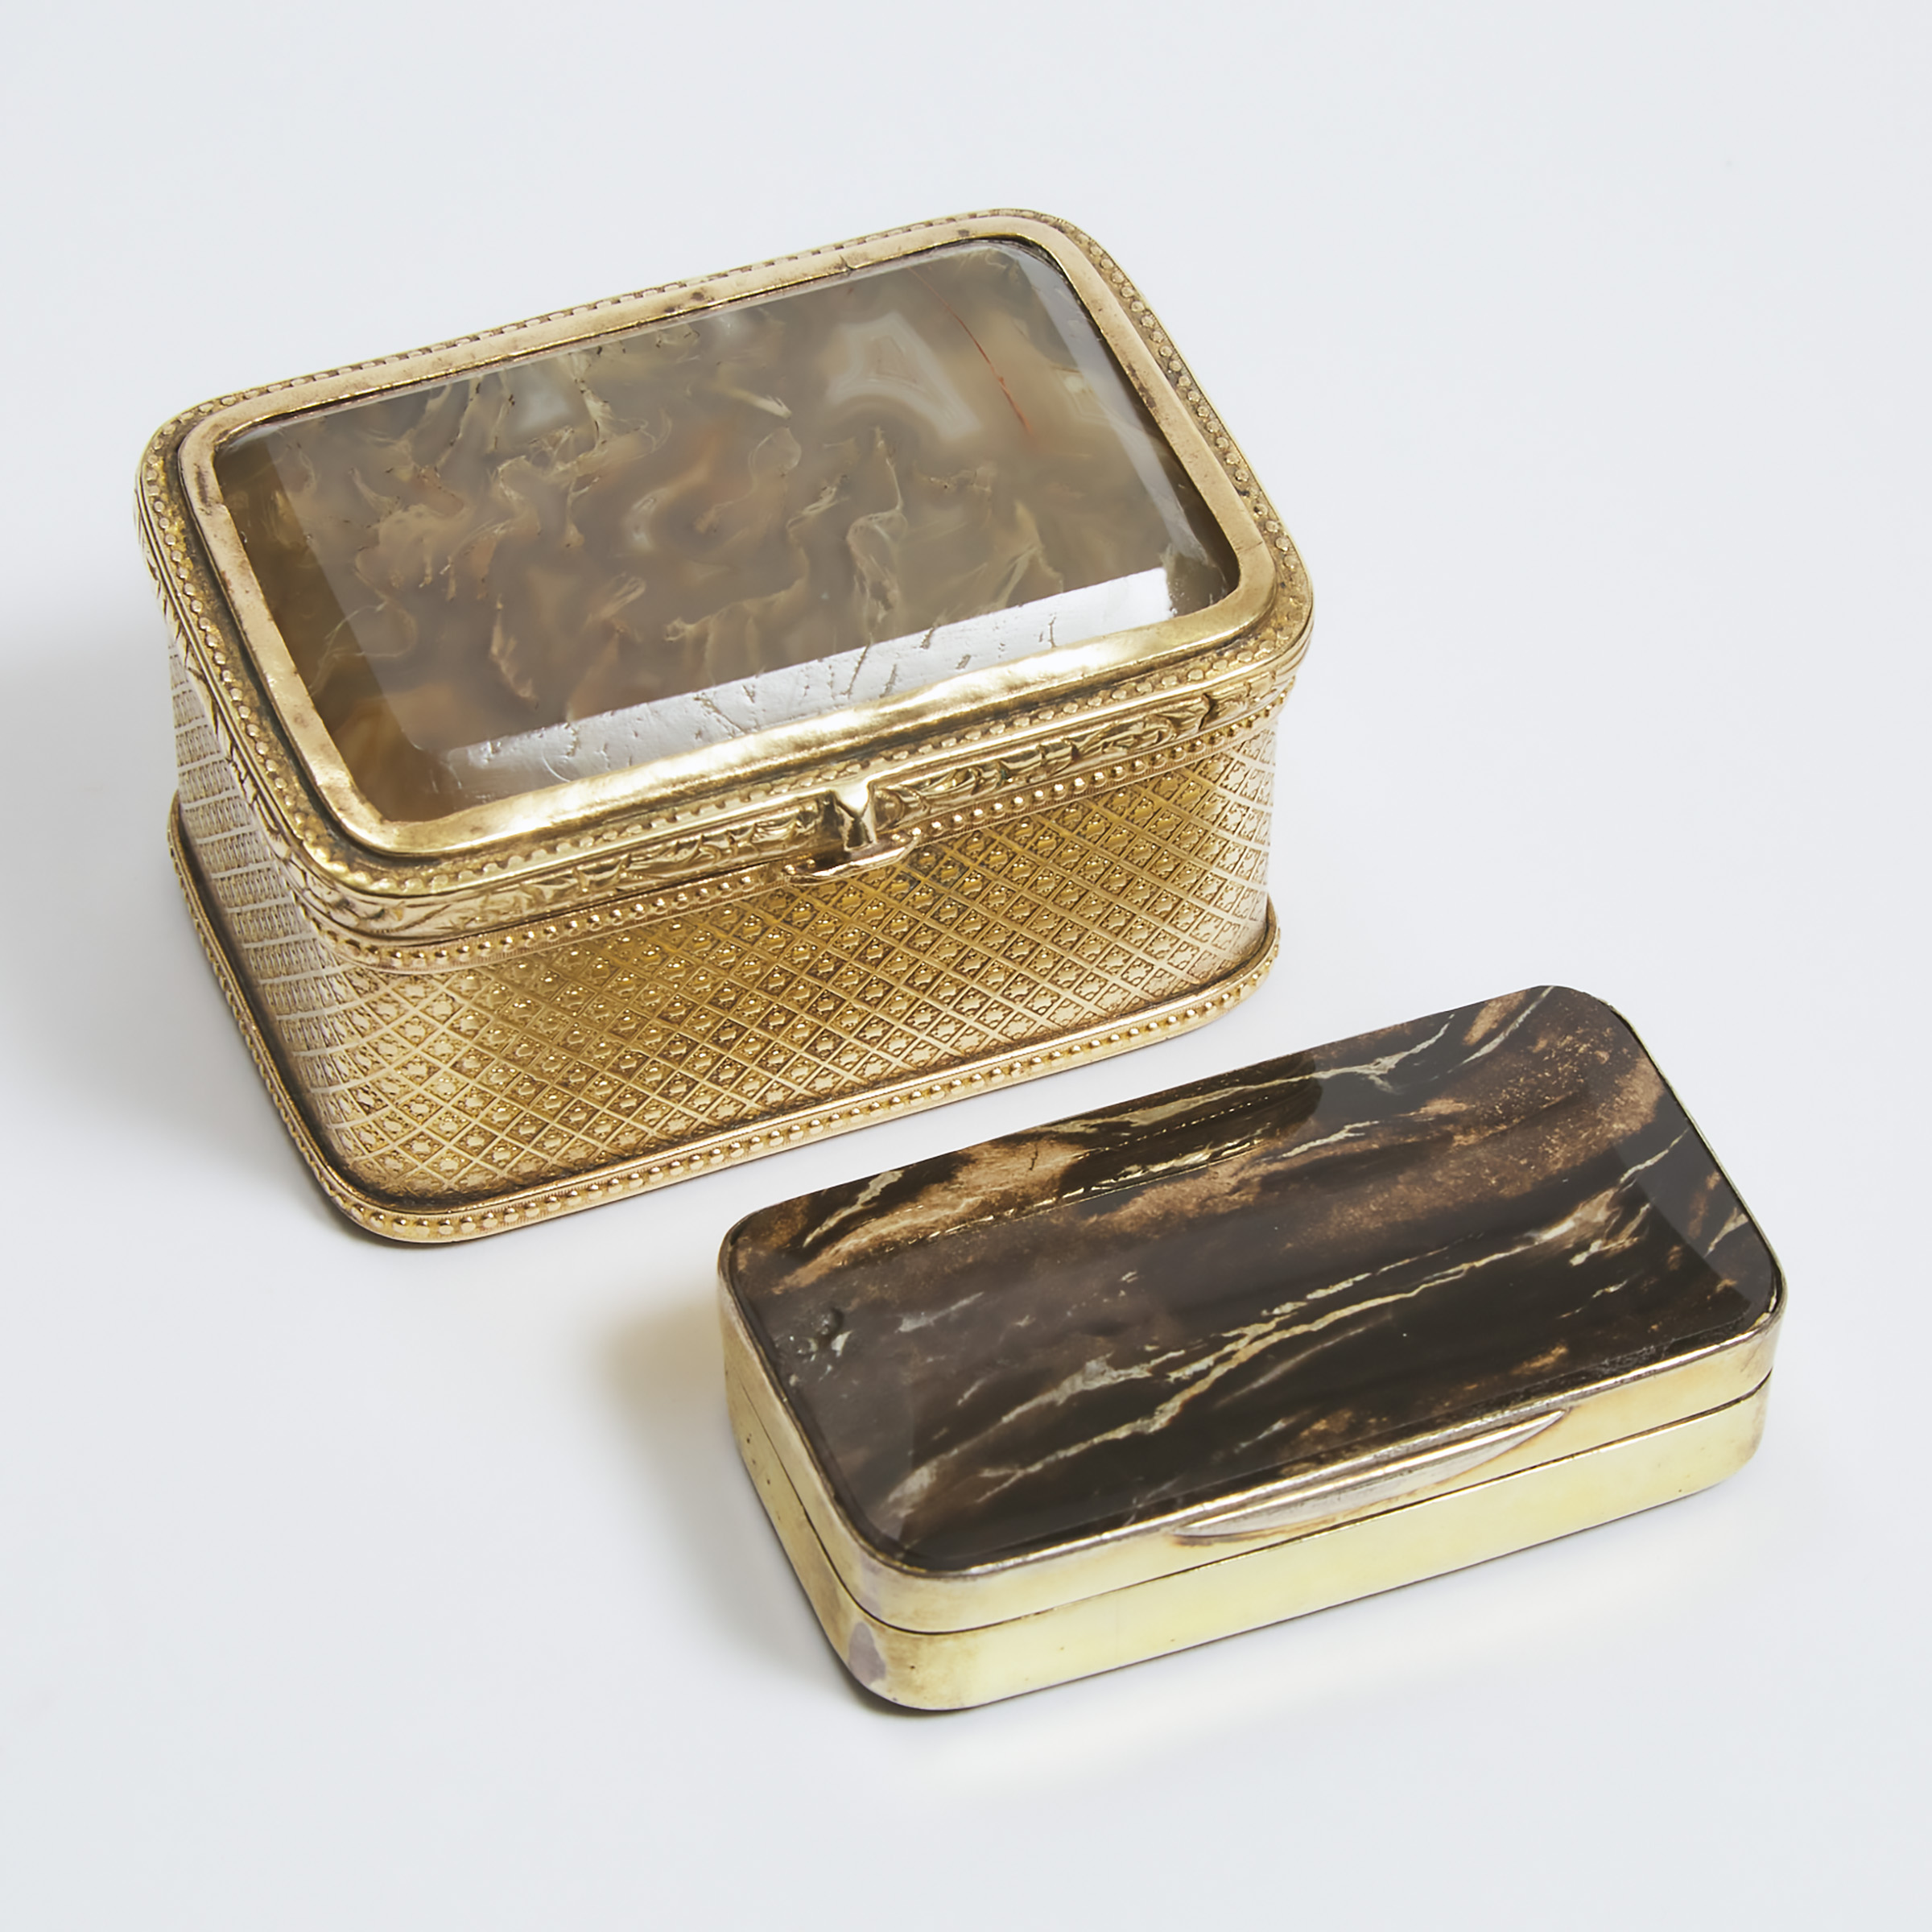 Two Italian Agate Mounted Gilt Metal Dresser Boxes, early 20th century